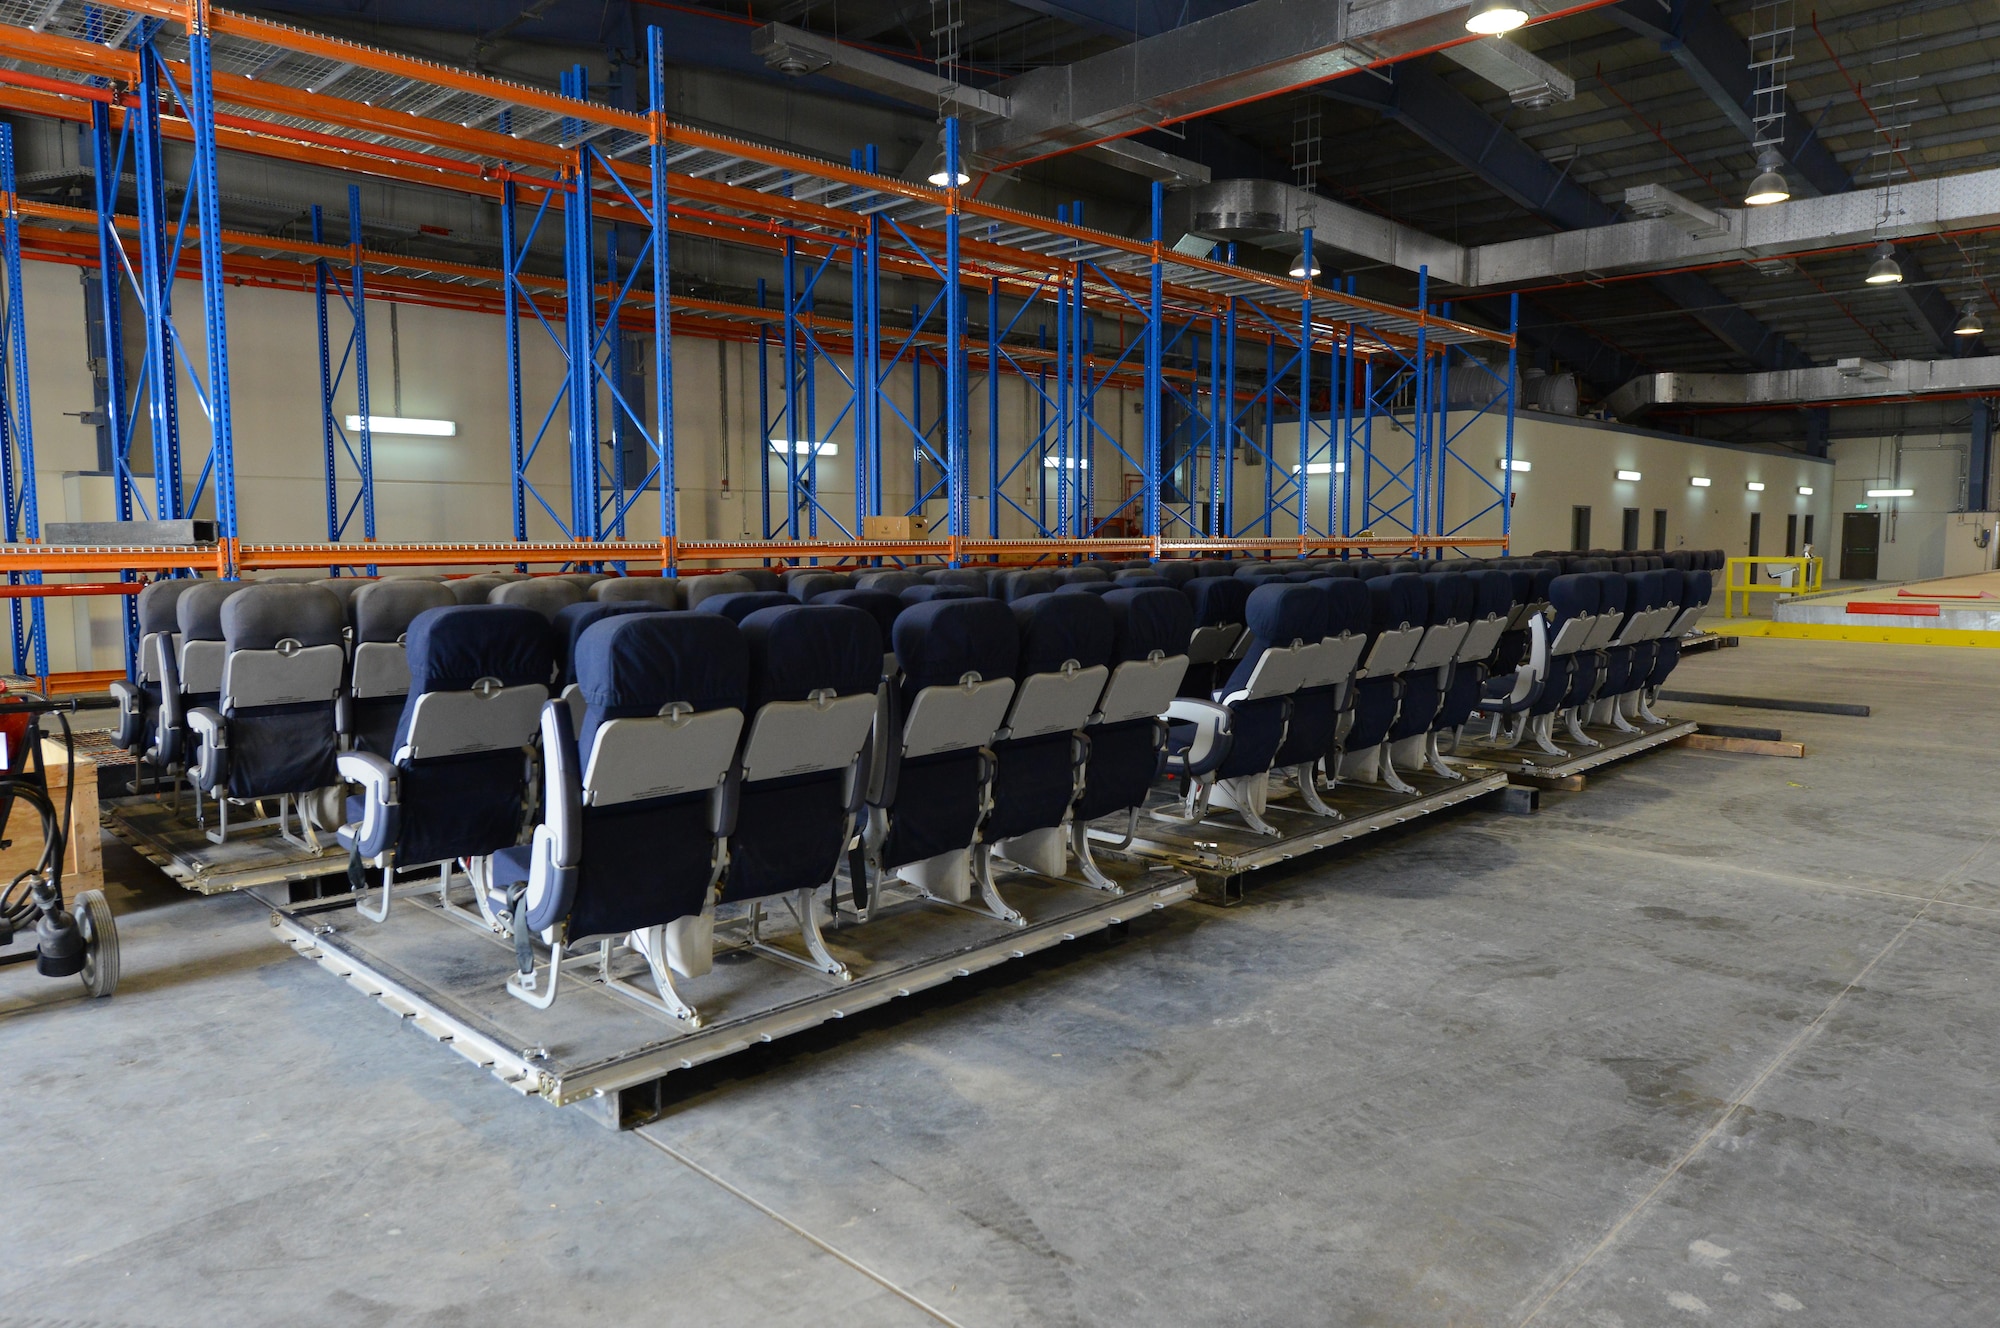 Seat kits, consisting of portable aircraft seats used inside transportation aircraft, are stored inside a Qatari facility recently constructed on Al Udeid Air Base, Qatar, on April 26, 2017. The new facility, used jointly by the U.S. and Qatari air forces, provides the proper environment, previously unavailable on Al Udeid Air Base, to store the kits.(U.S. Air Force photo by Tech. Sgt. Bradly A. Schneider)